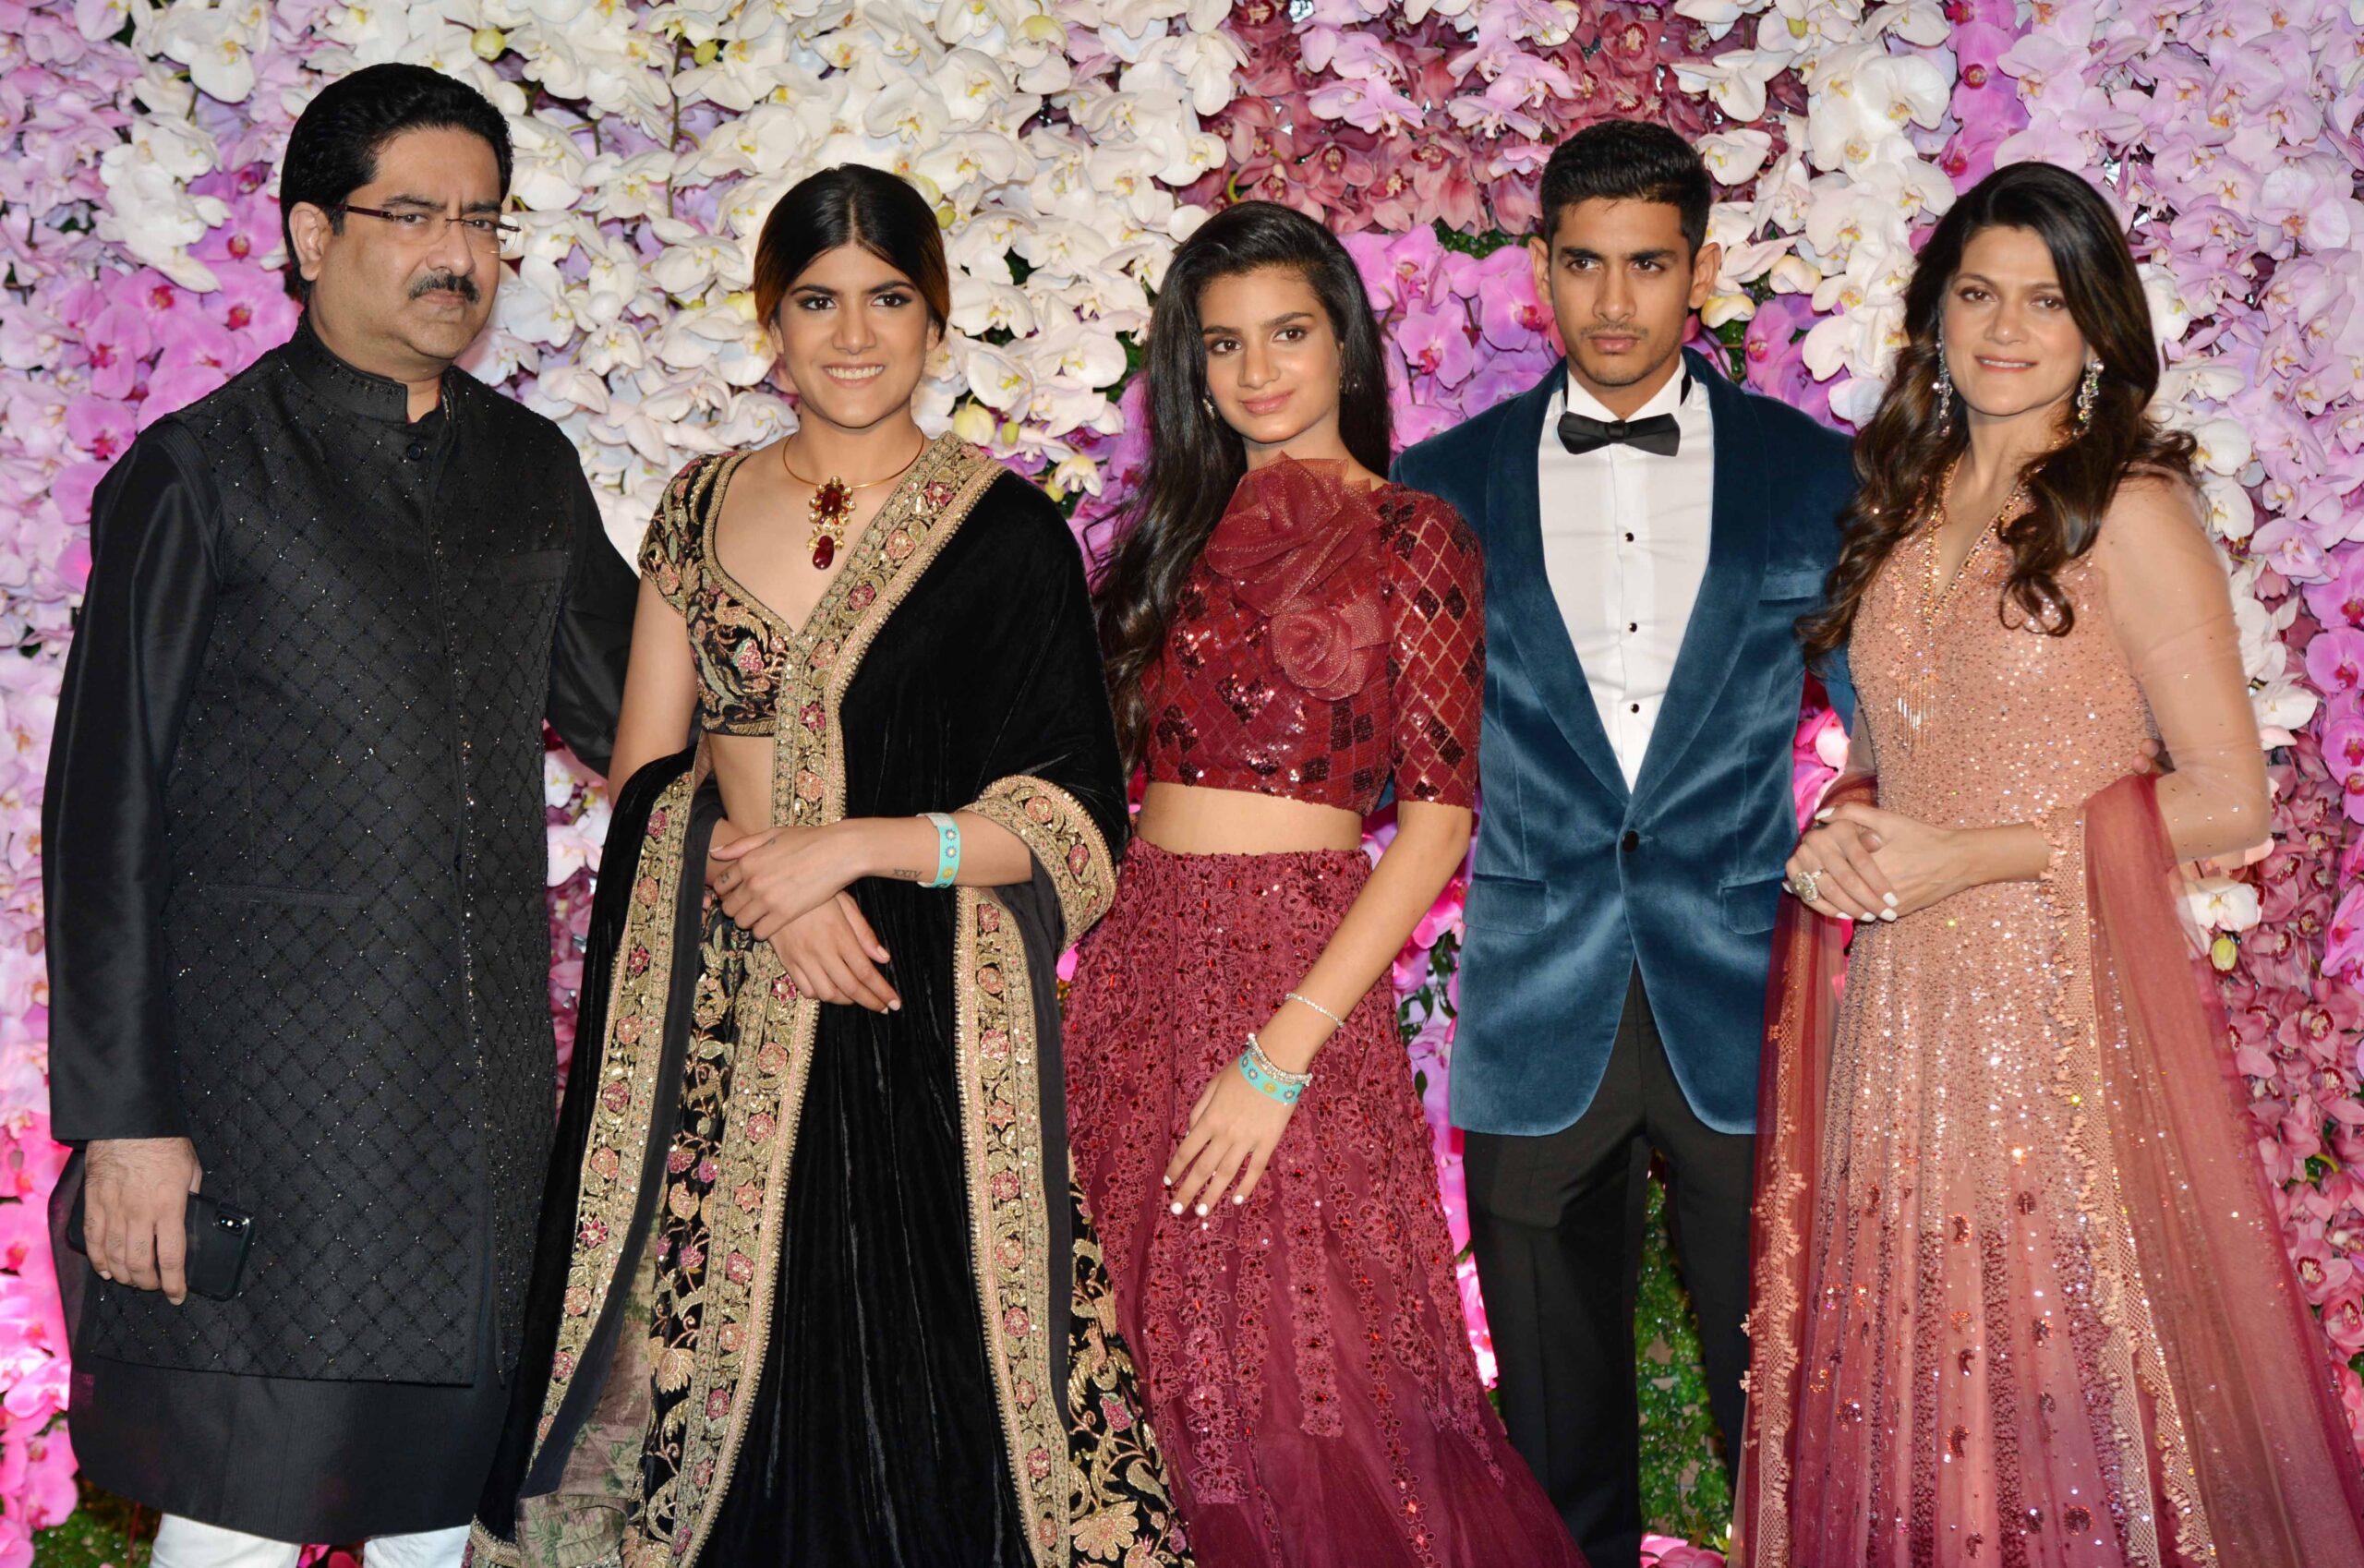 Photos: How I Spent $1.9 Million on My Five-Day Indian Wedding in